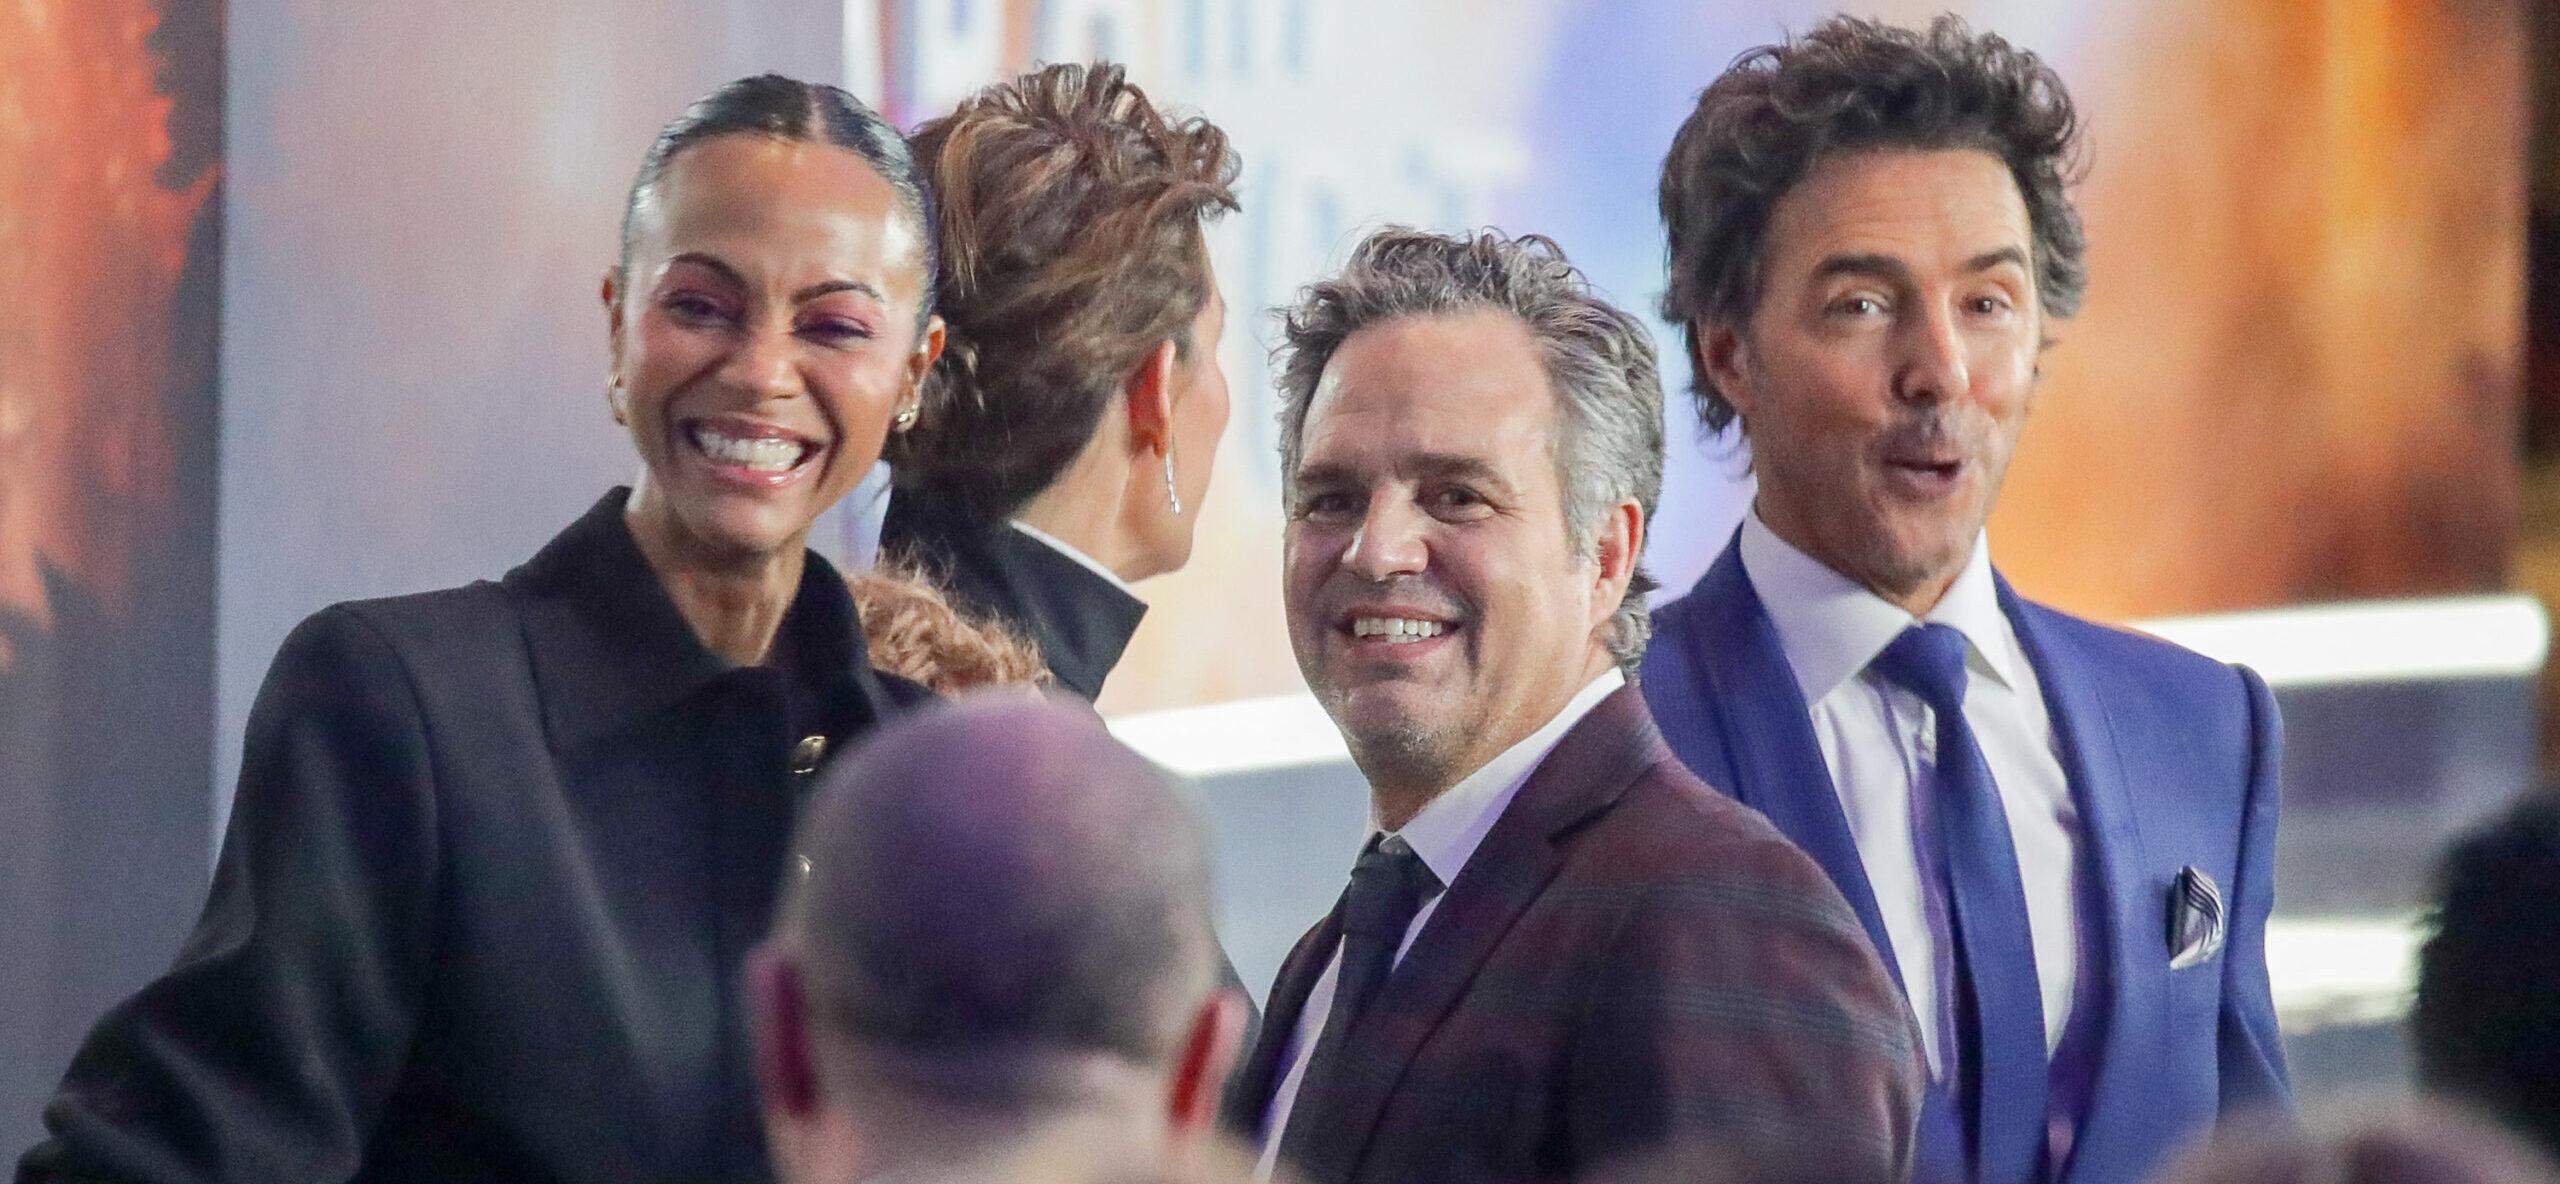 Mark Ruffalo Will Star In Upcoming HBO Limited Series From ‘Mare Of Easttown’ Creator